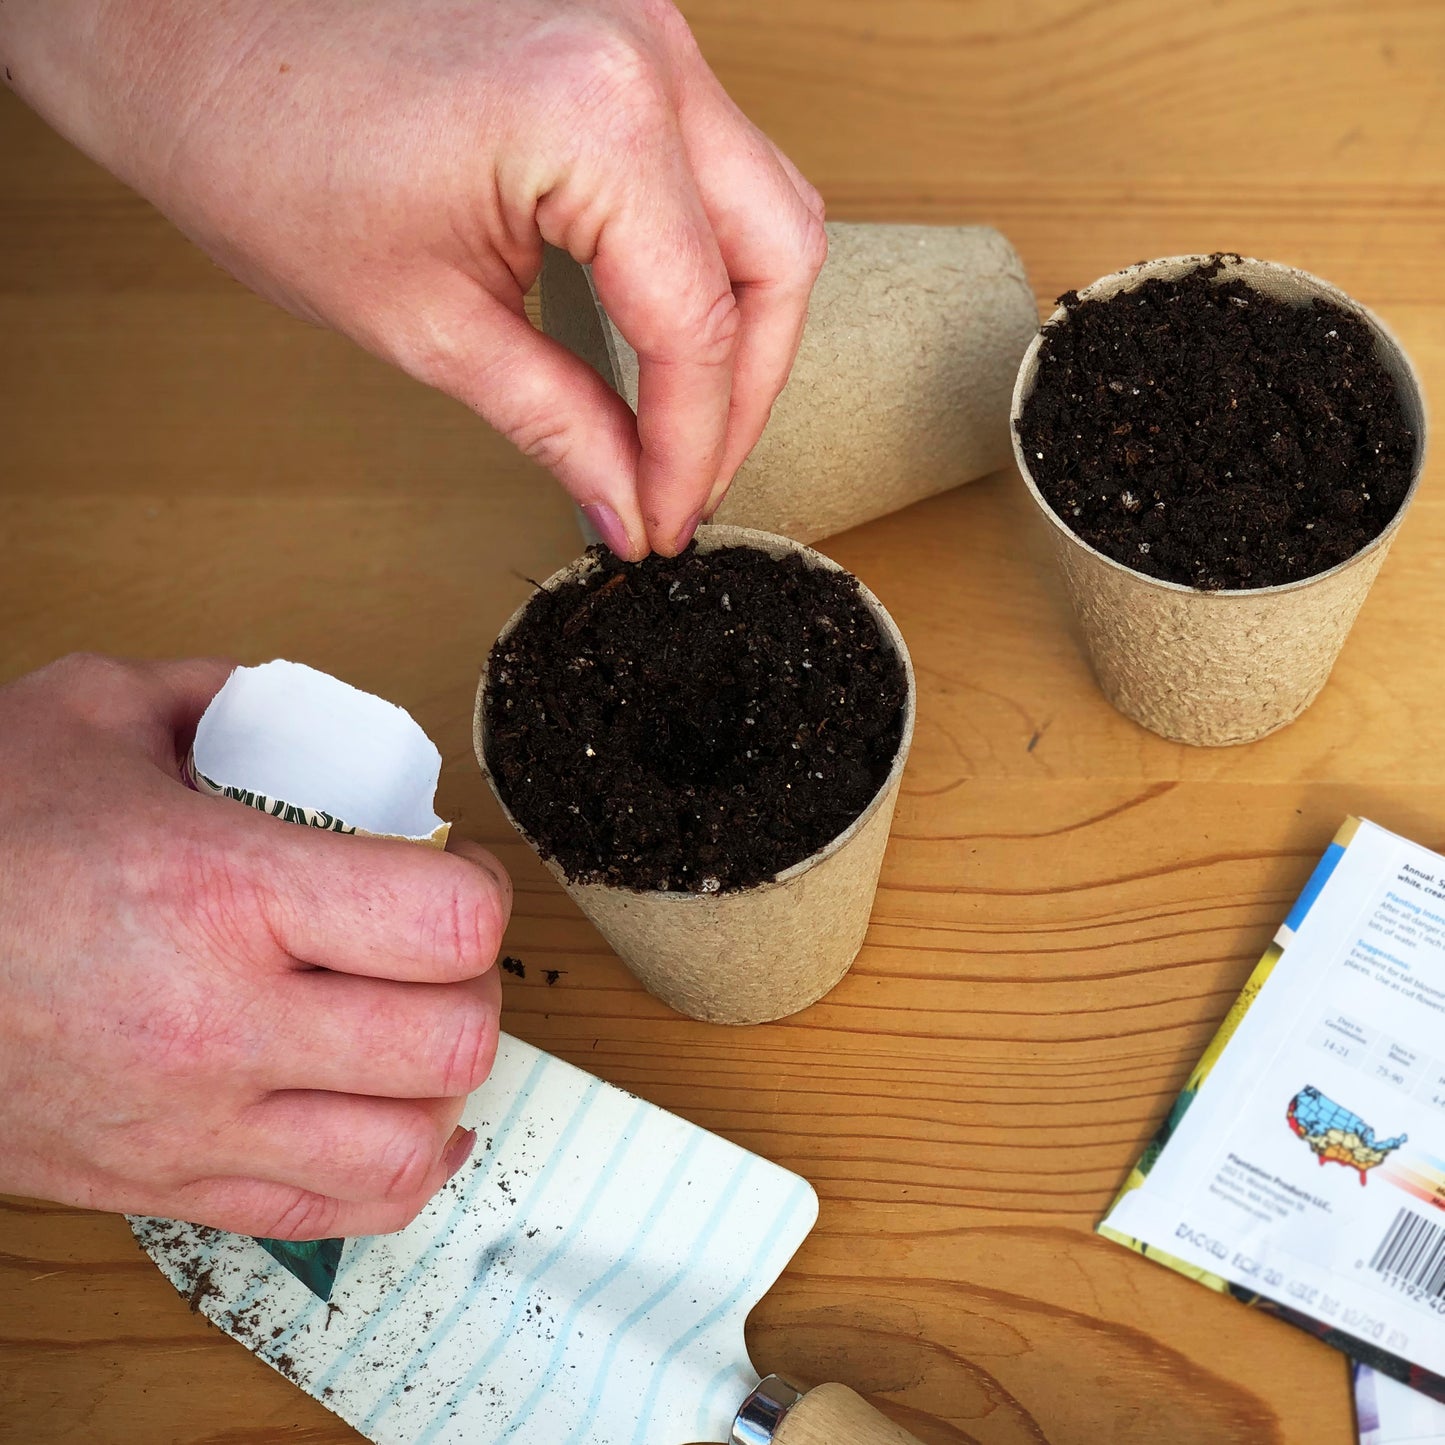 Start Passion Flower seeds in biodegradable paper or peat pots.